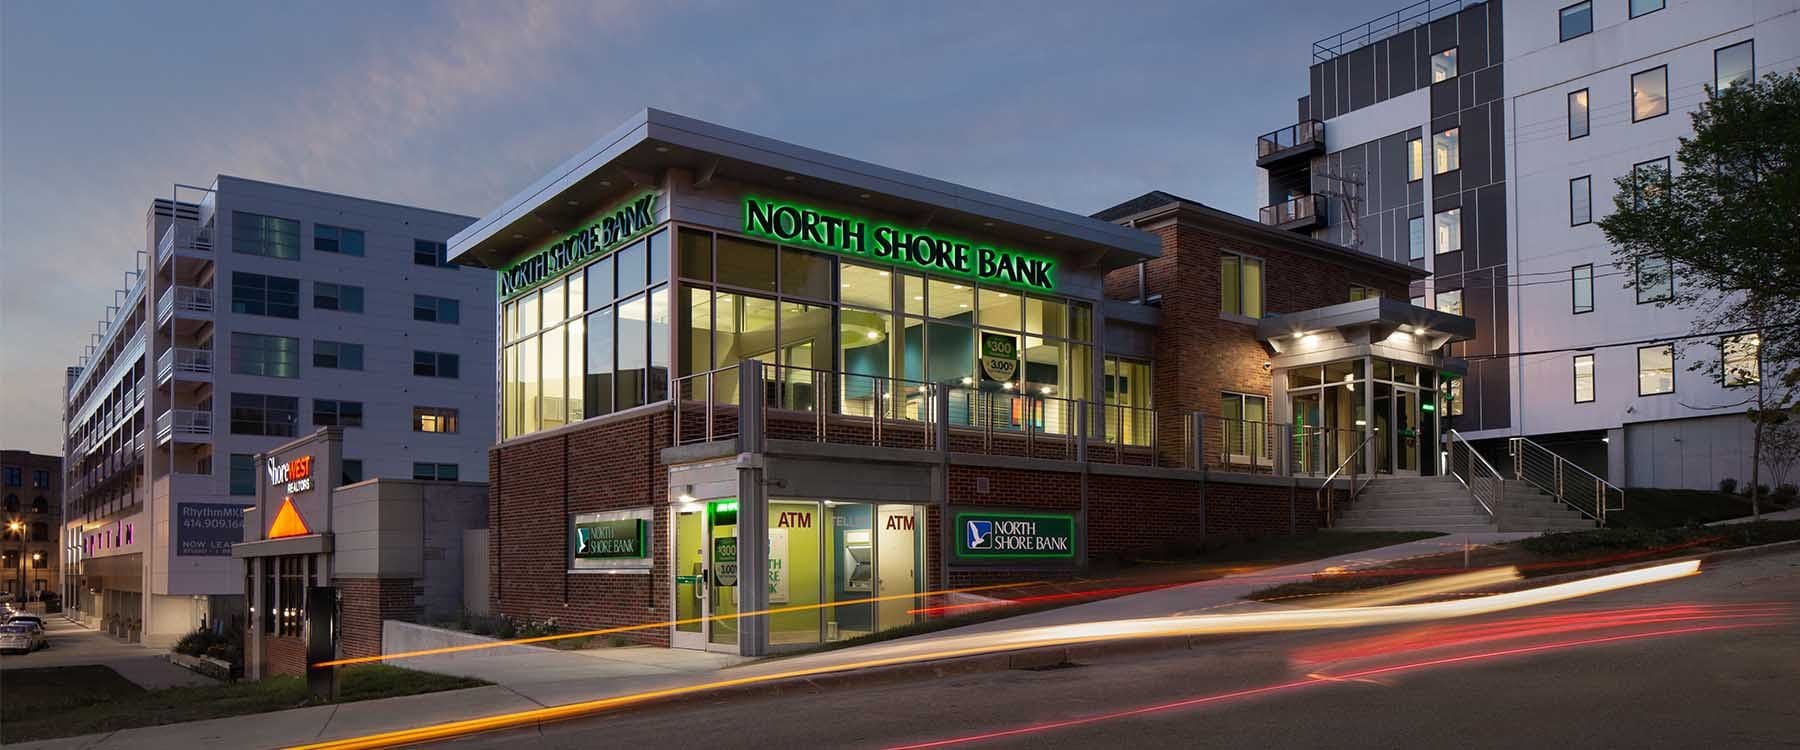 North Shore Bank At North End provides new options for consumer banking in this branch that features ITM's